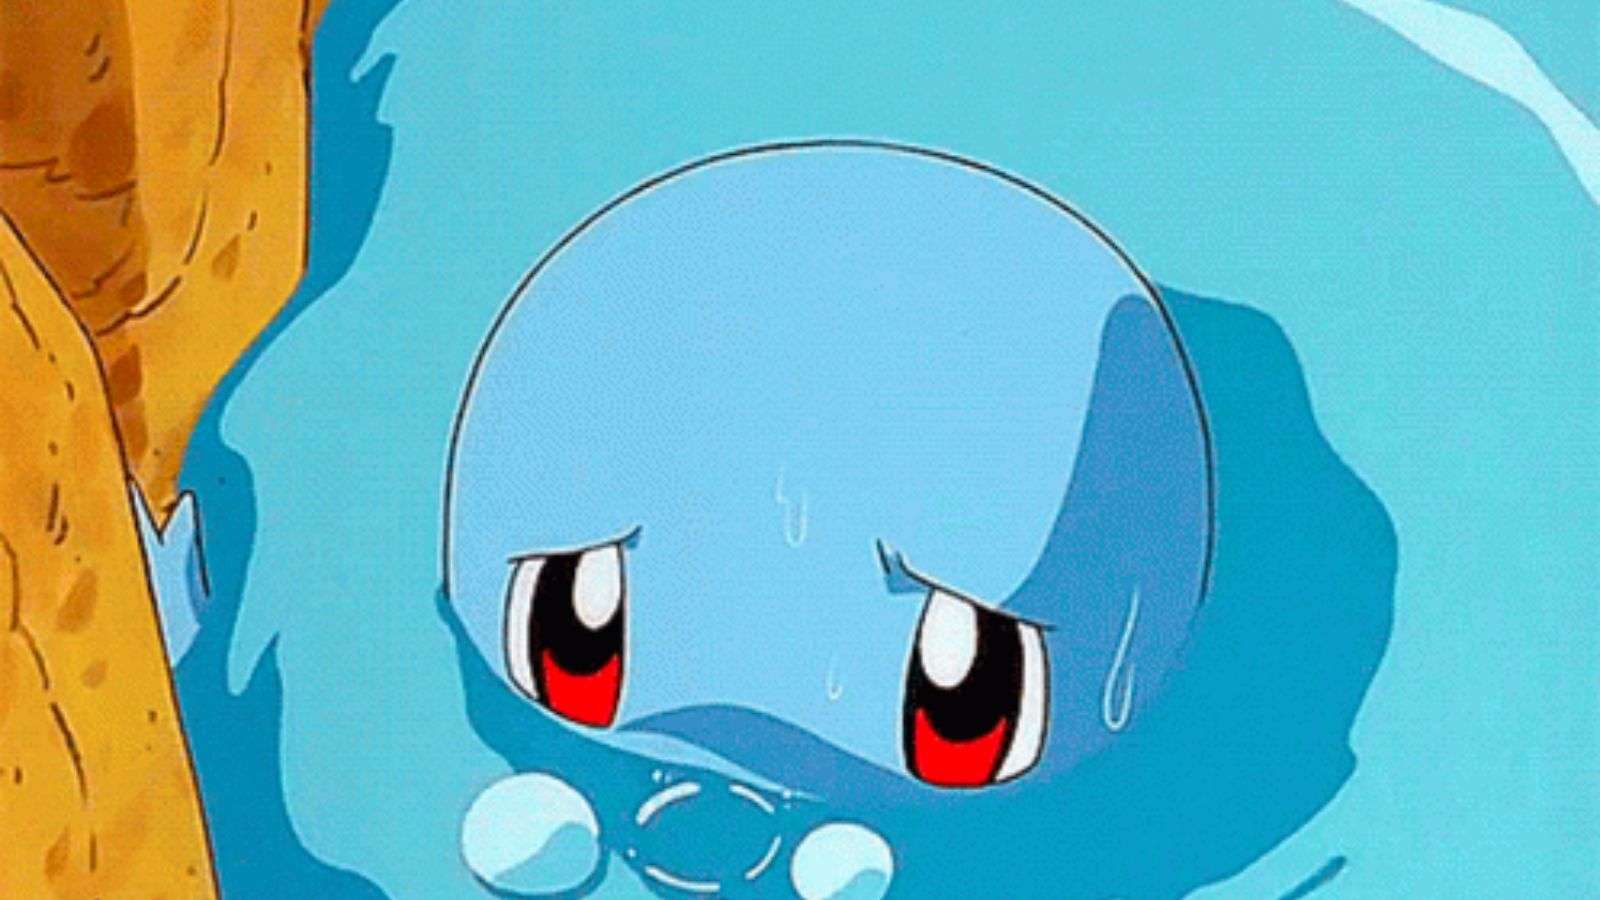 Pokemon Squirtle is sad about Pokemon Go issues